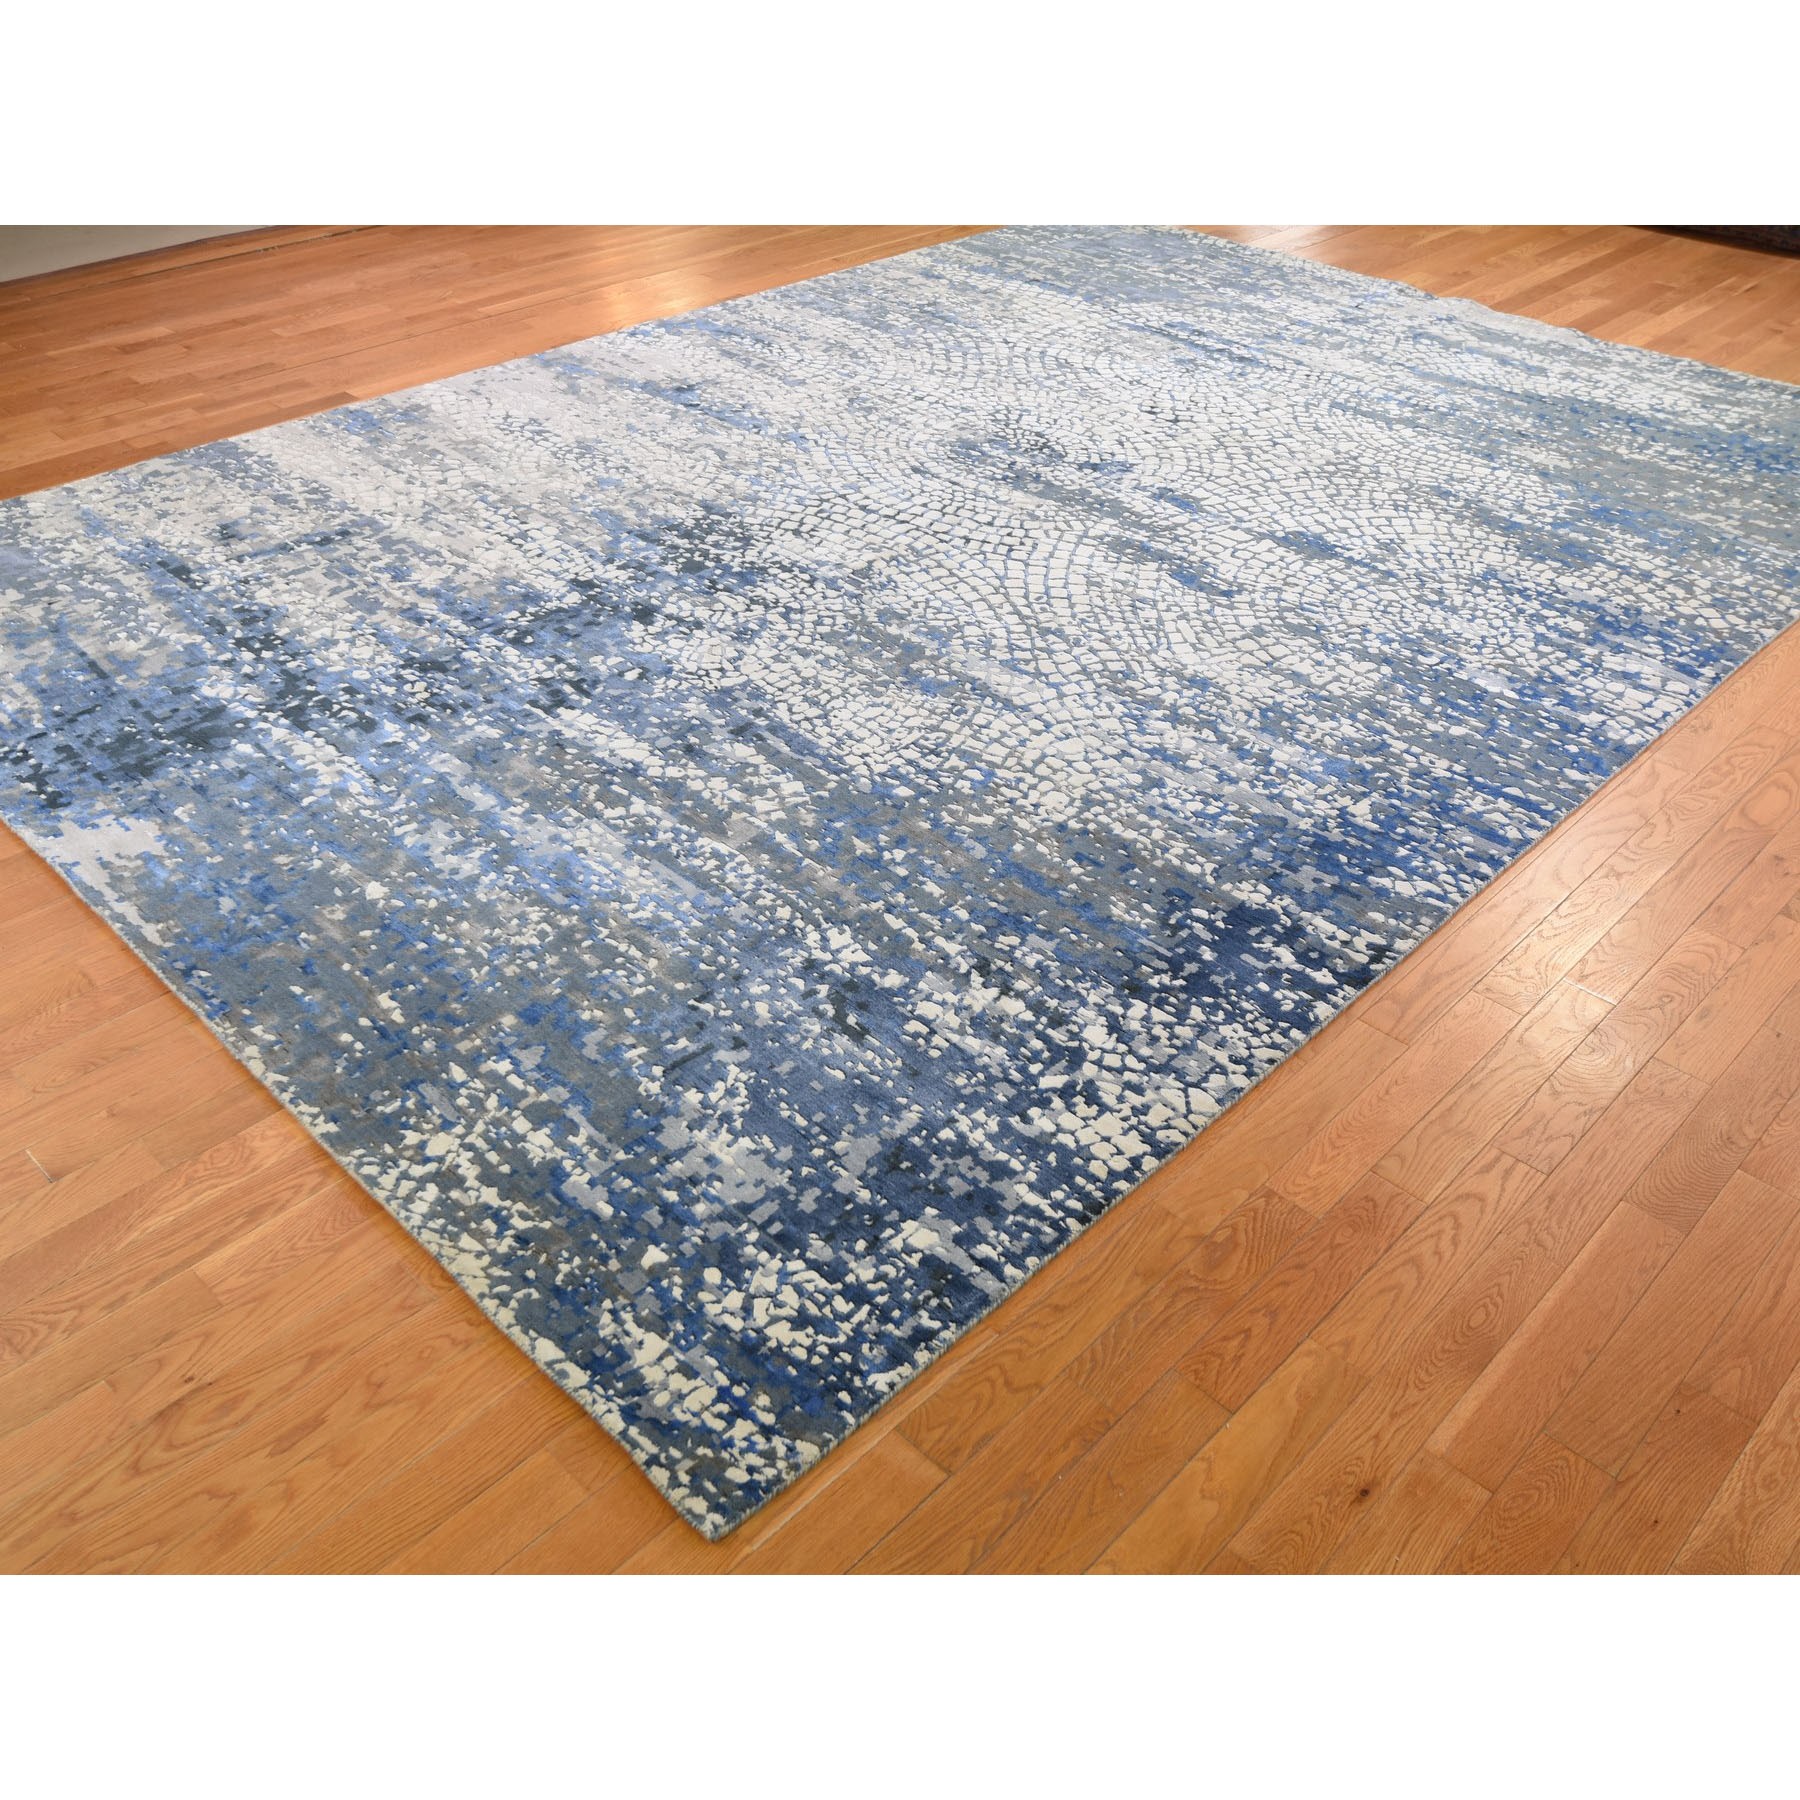 10-2 x14- Blue Wool And Pure Silk Erased Roman Mosaic Design hand Knotted Oriental Rug 